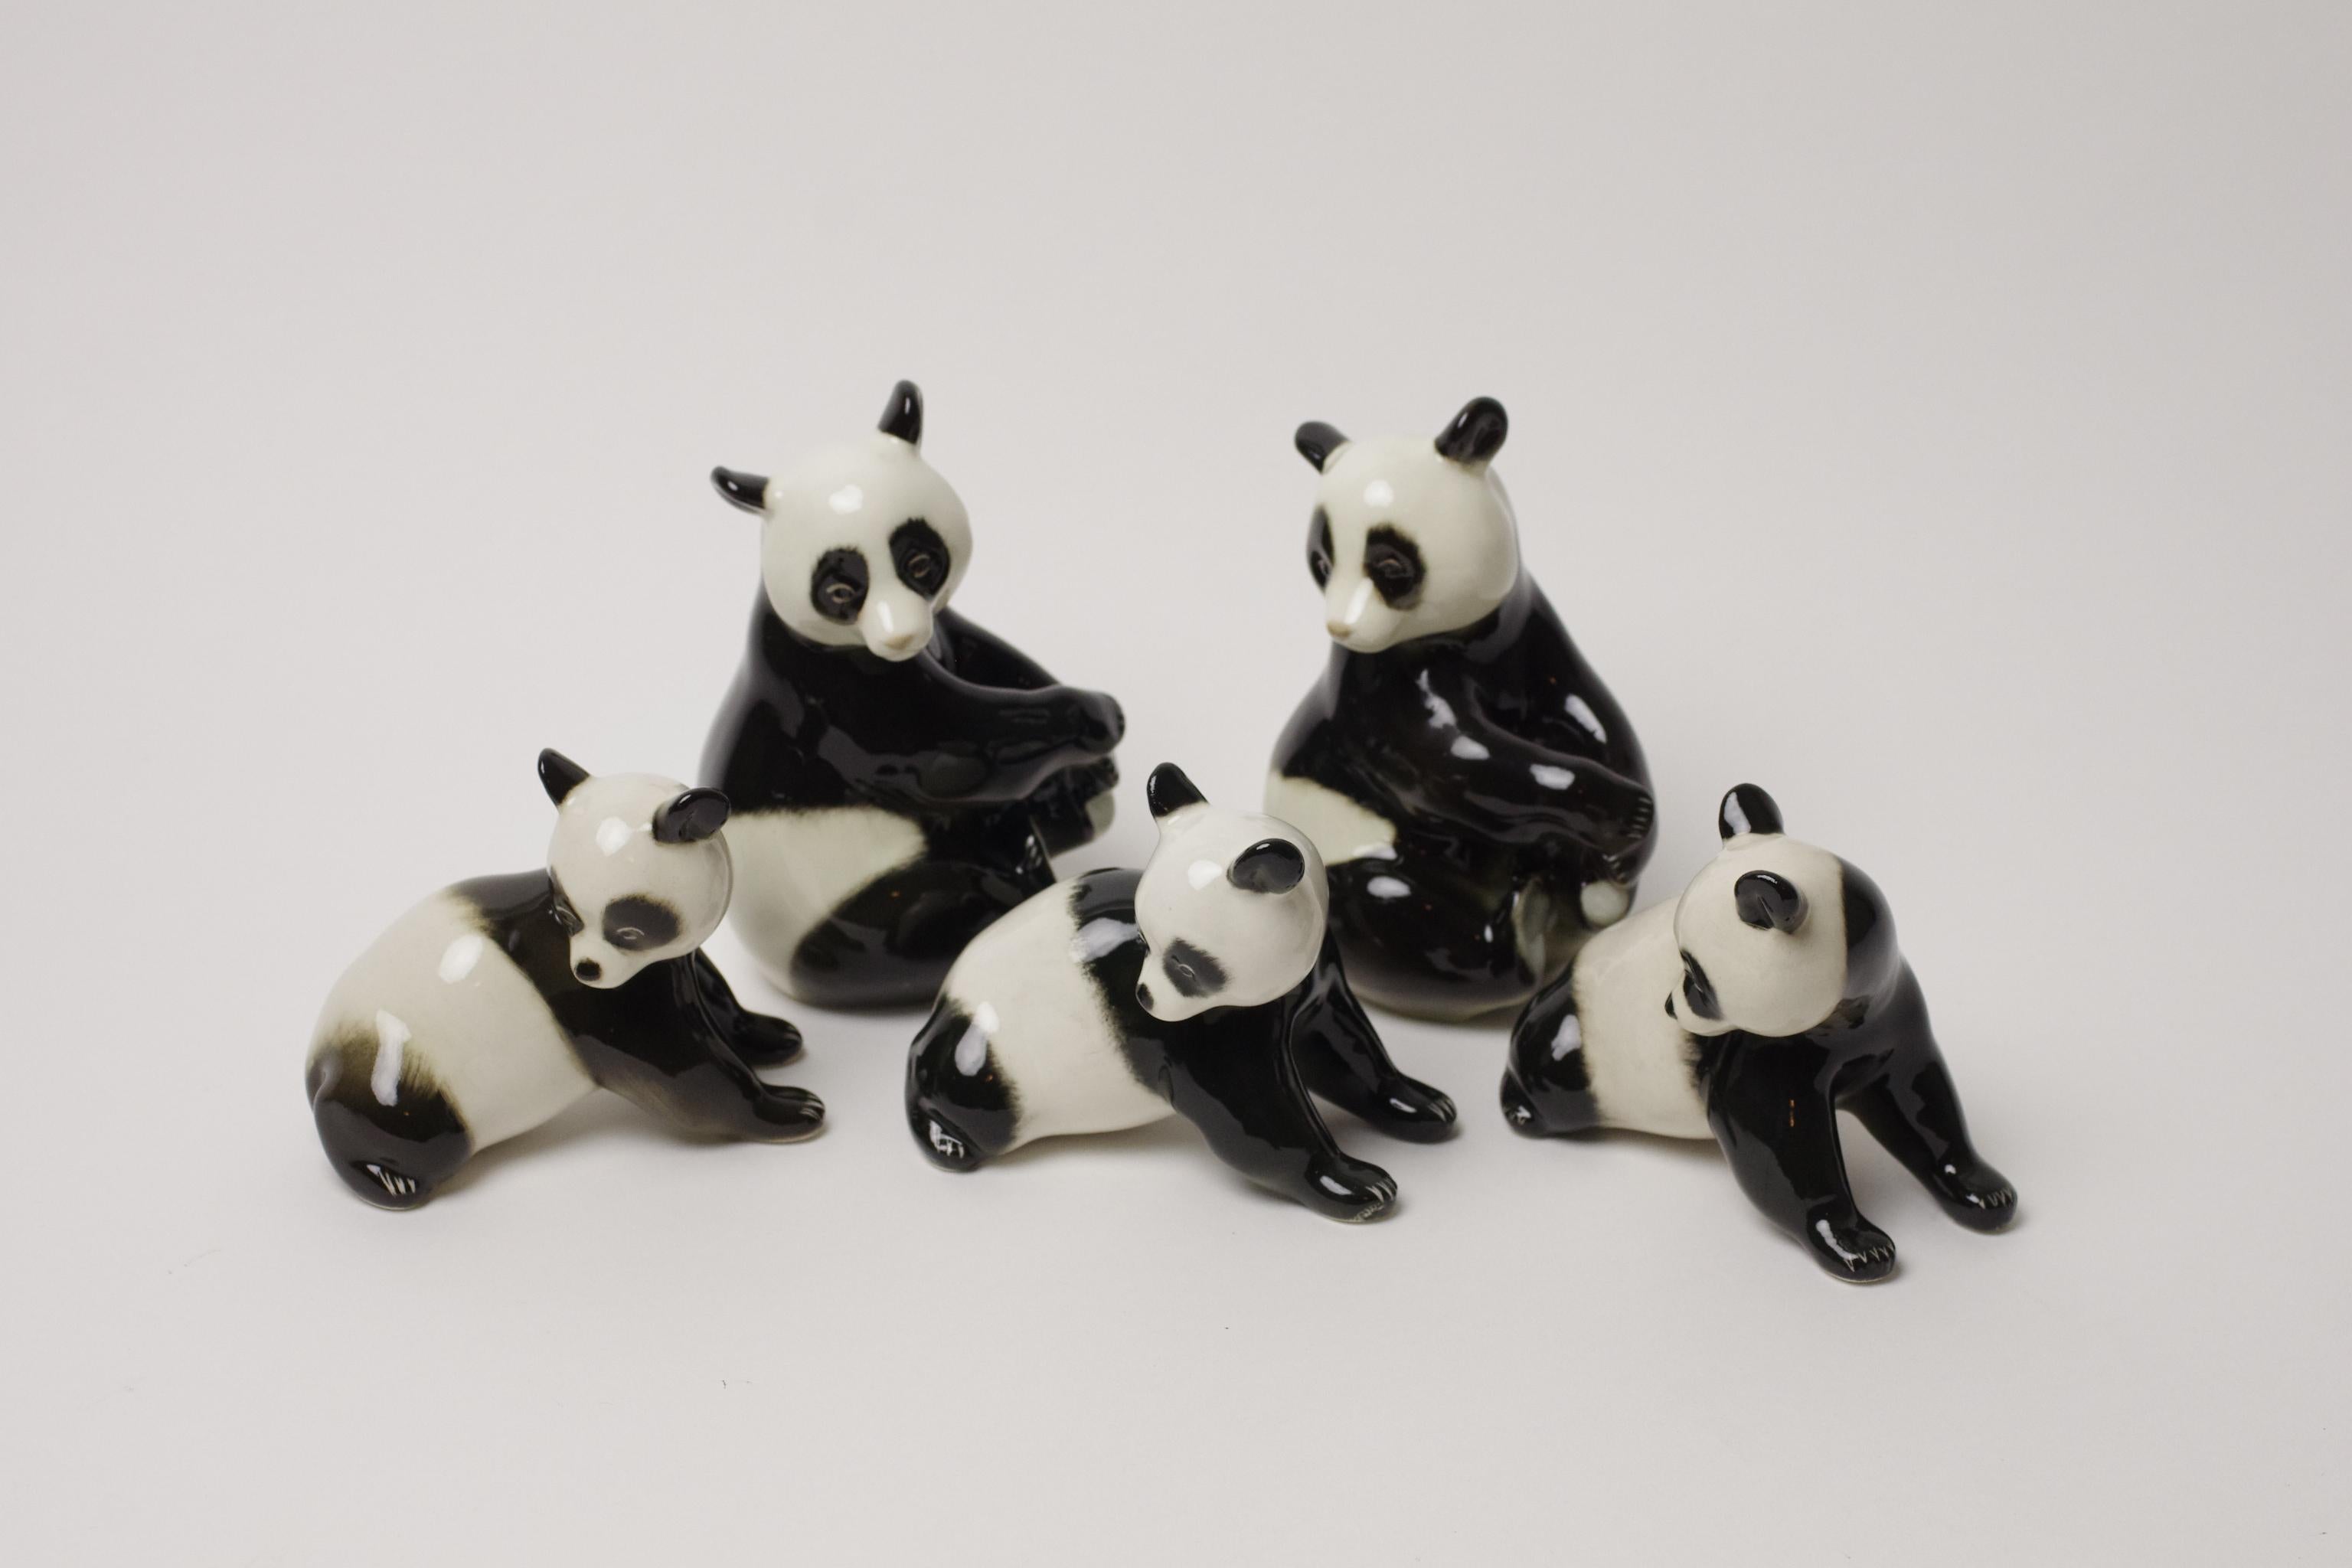 Product Description:
This cute family of pandas has been designed and created by the Lomonosov Porcelain Factory. The company still exists and this design is still being produced but the pandas on offer here are vintage (based on the stamps the